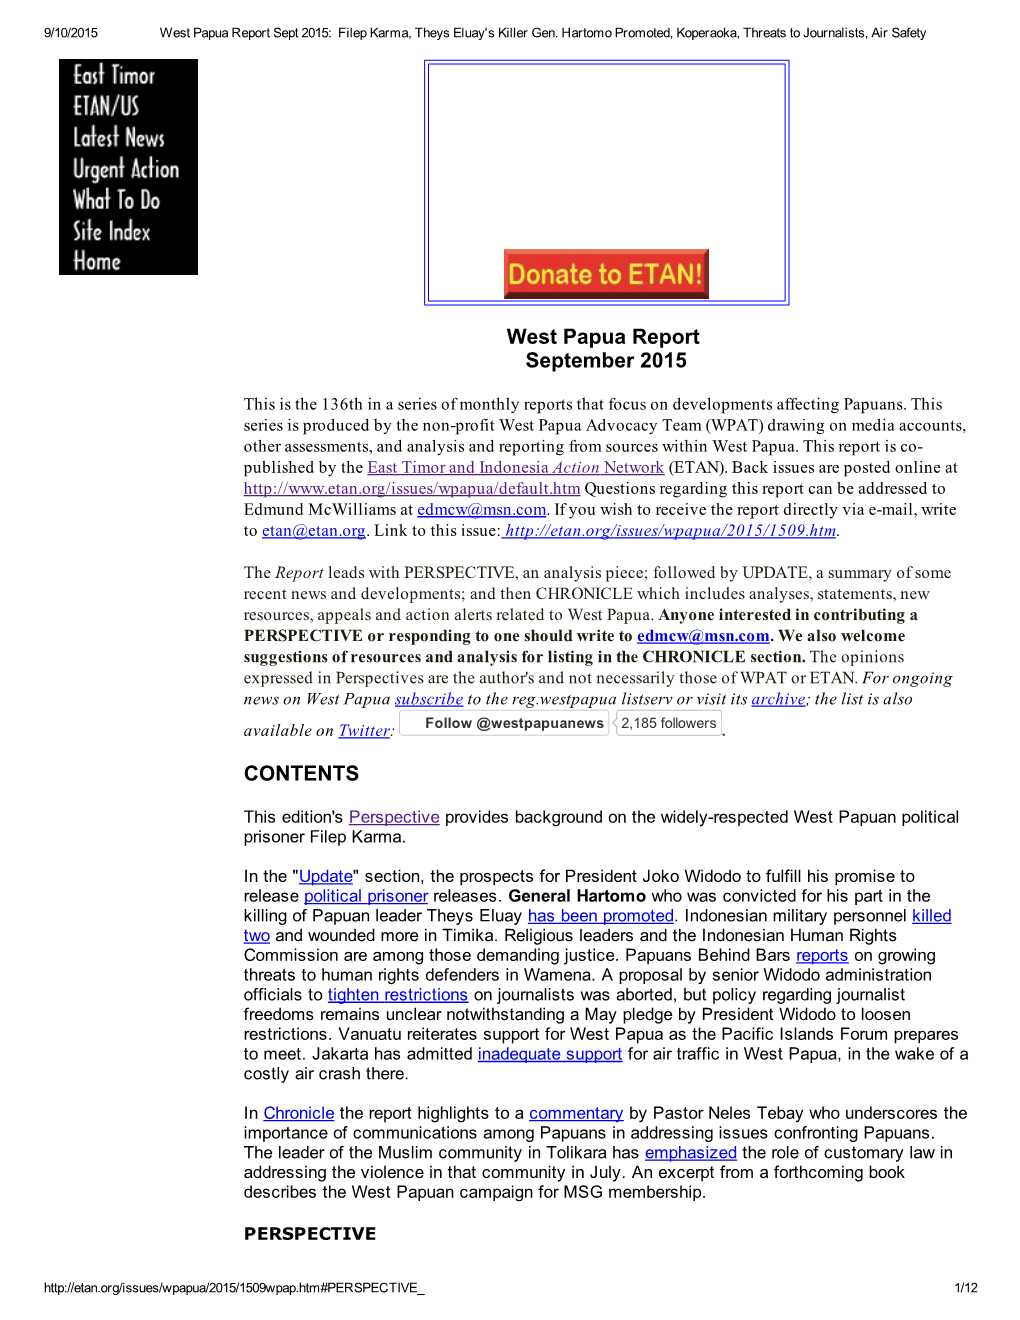 West Papua Report September 2015 CONTENTS